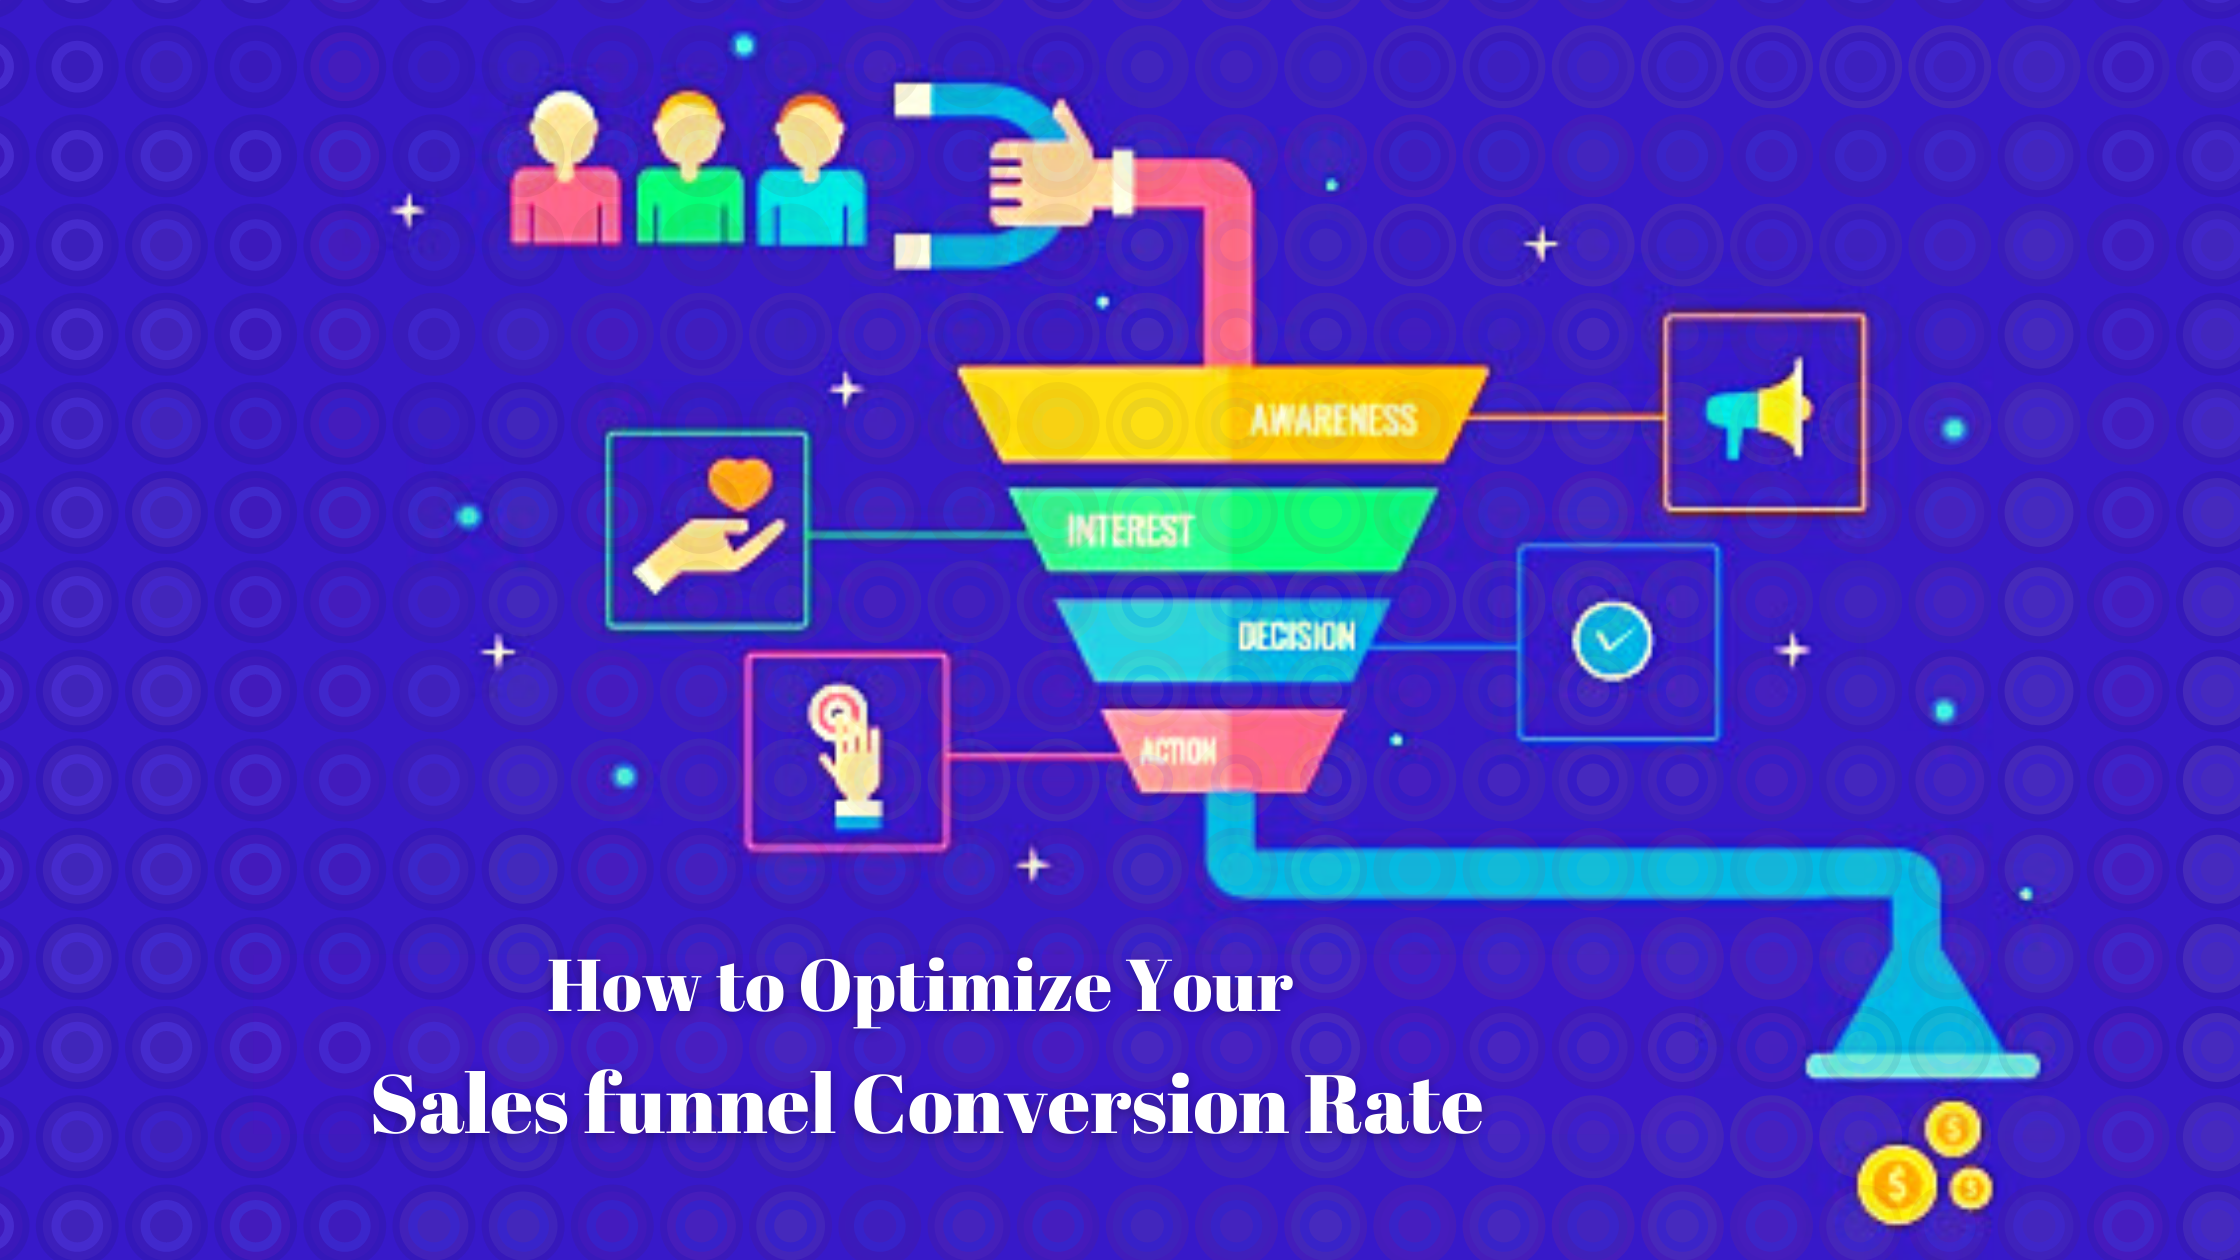 How to improve your Sales funnel conversion rate